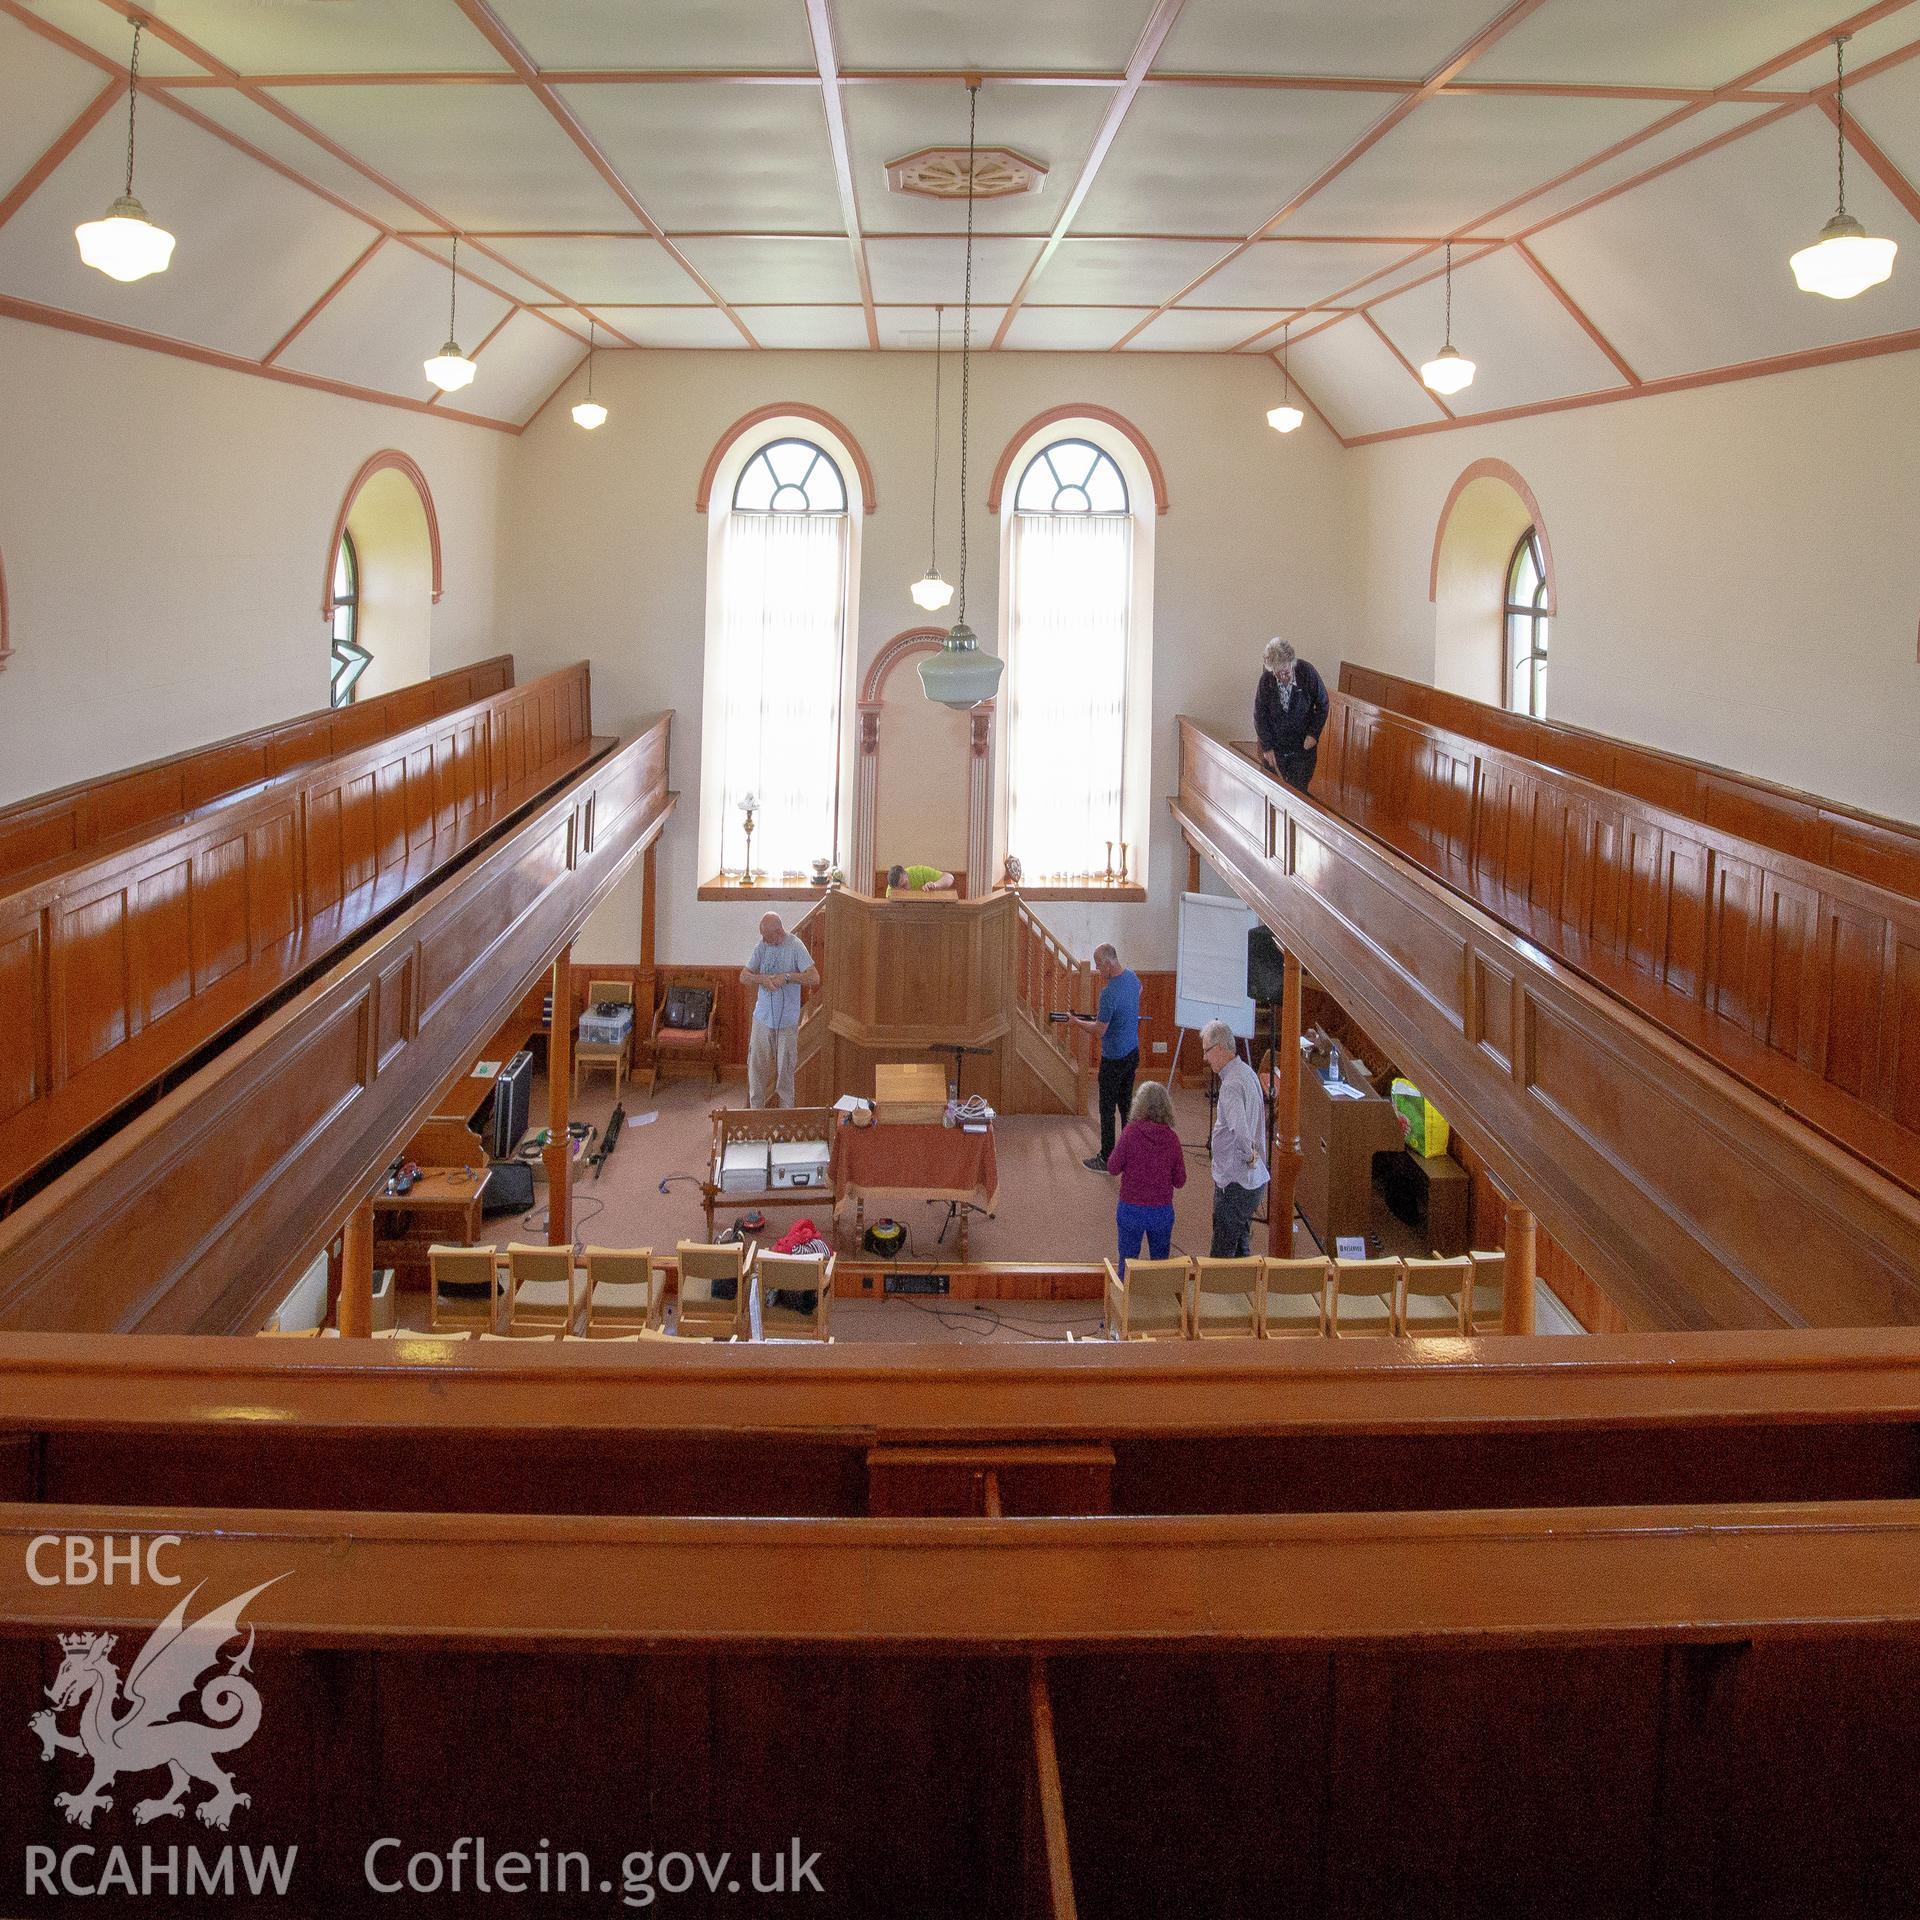 Colour photograph showing interior of Caersalem Welsh Baptist Chapel, Cilgwyn, Nevern. Photographed by Richard Barrett on 22nd June 2018.